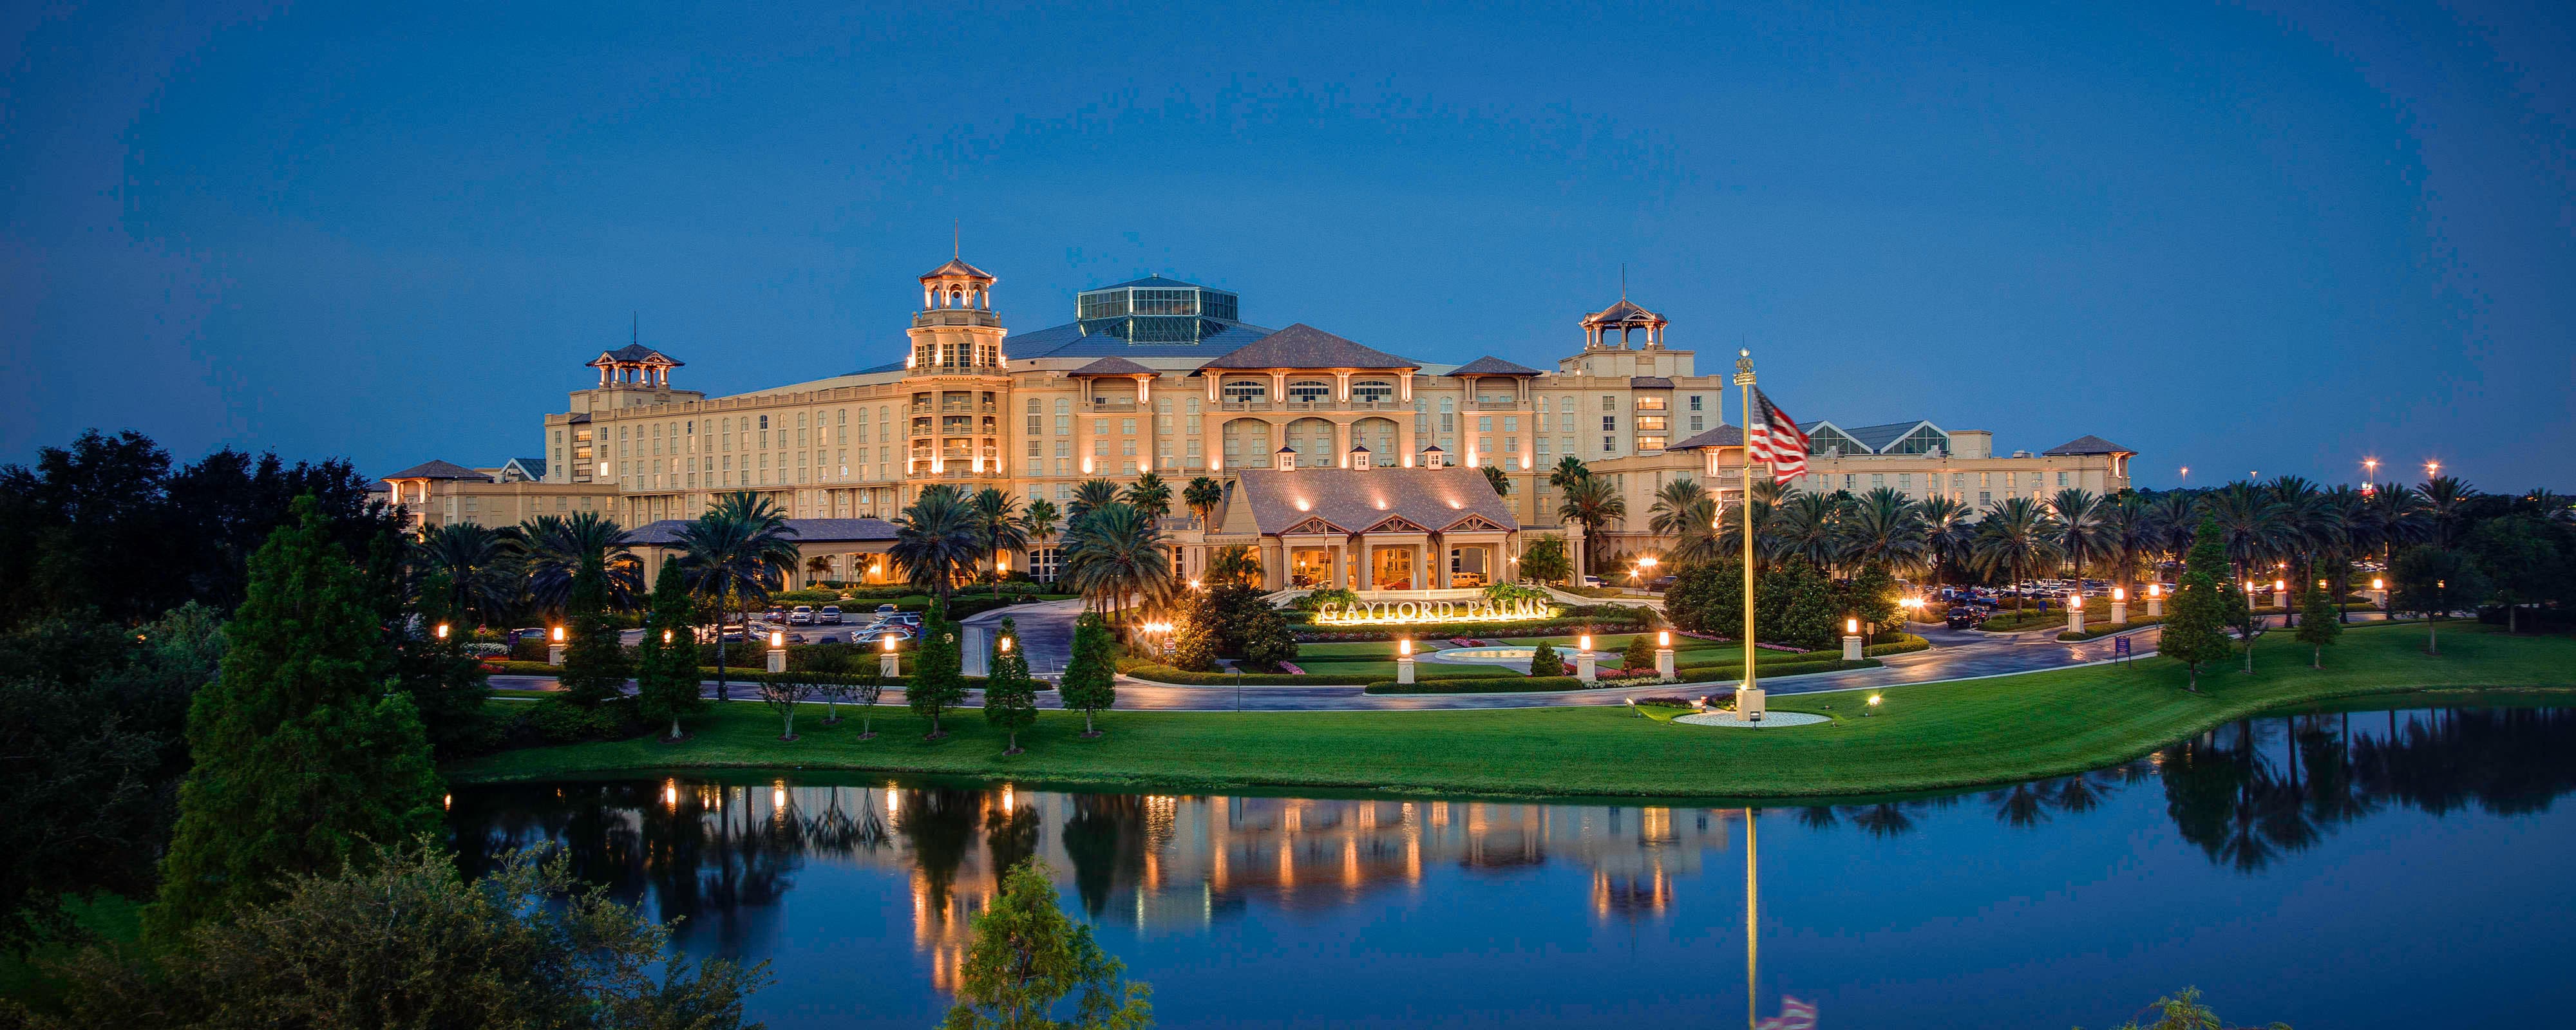 Kissimmee Hotel Packages And Deals Gaylord Palms Resort